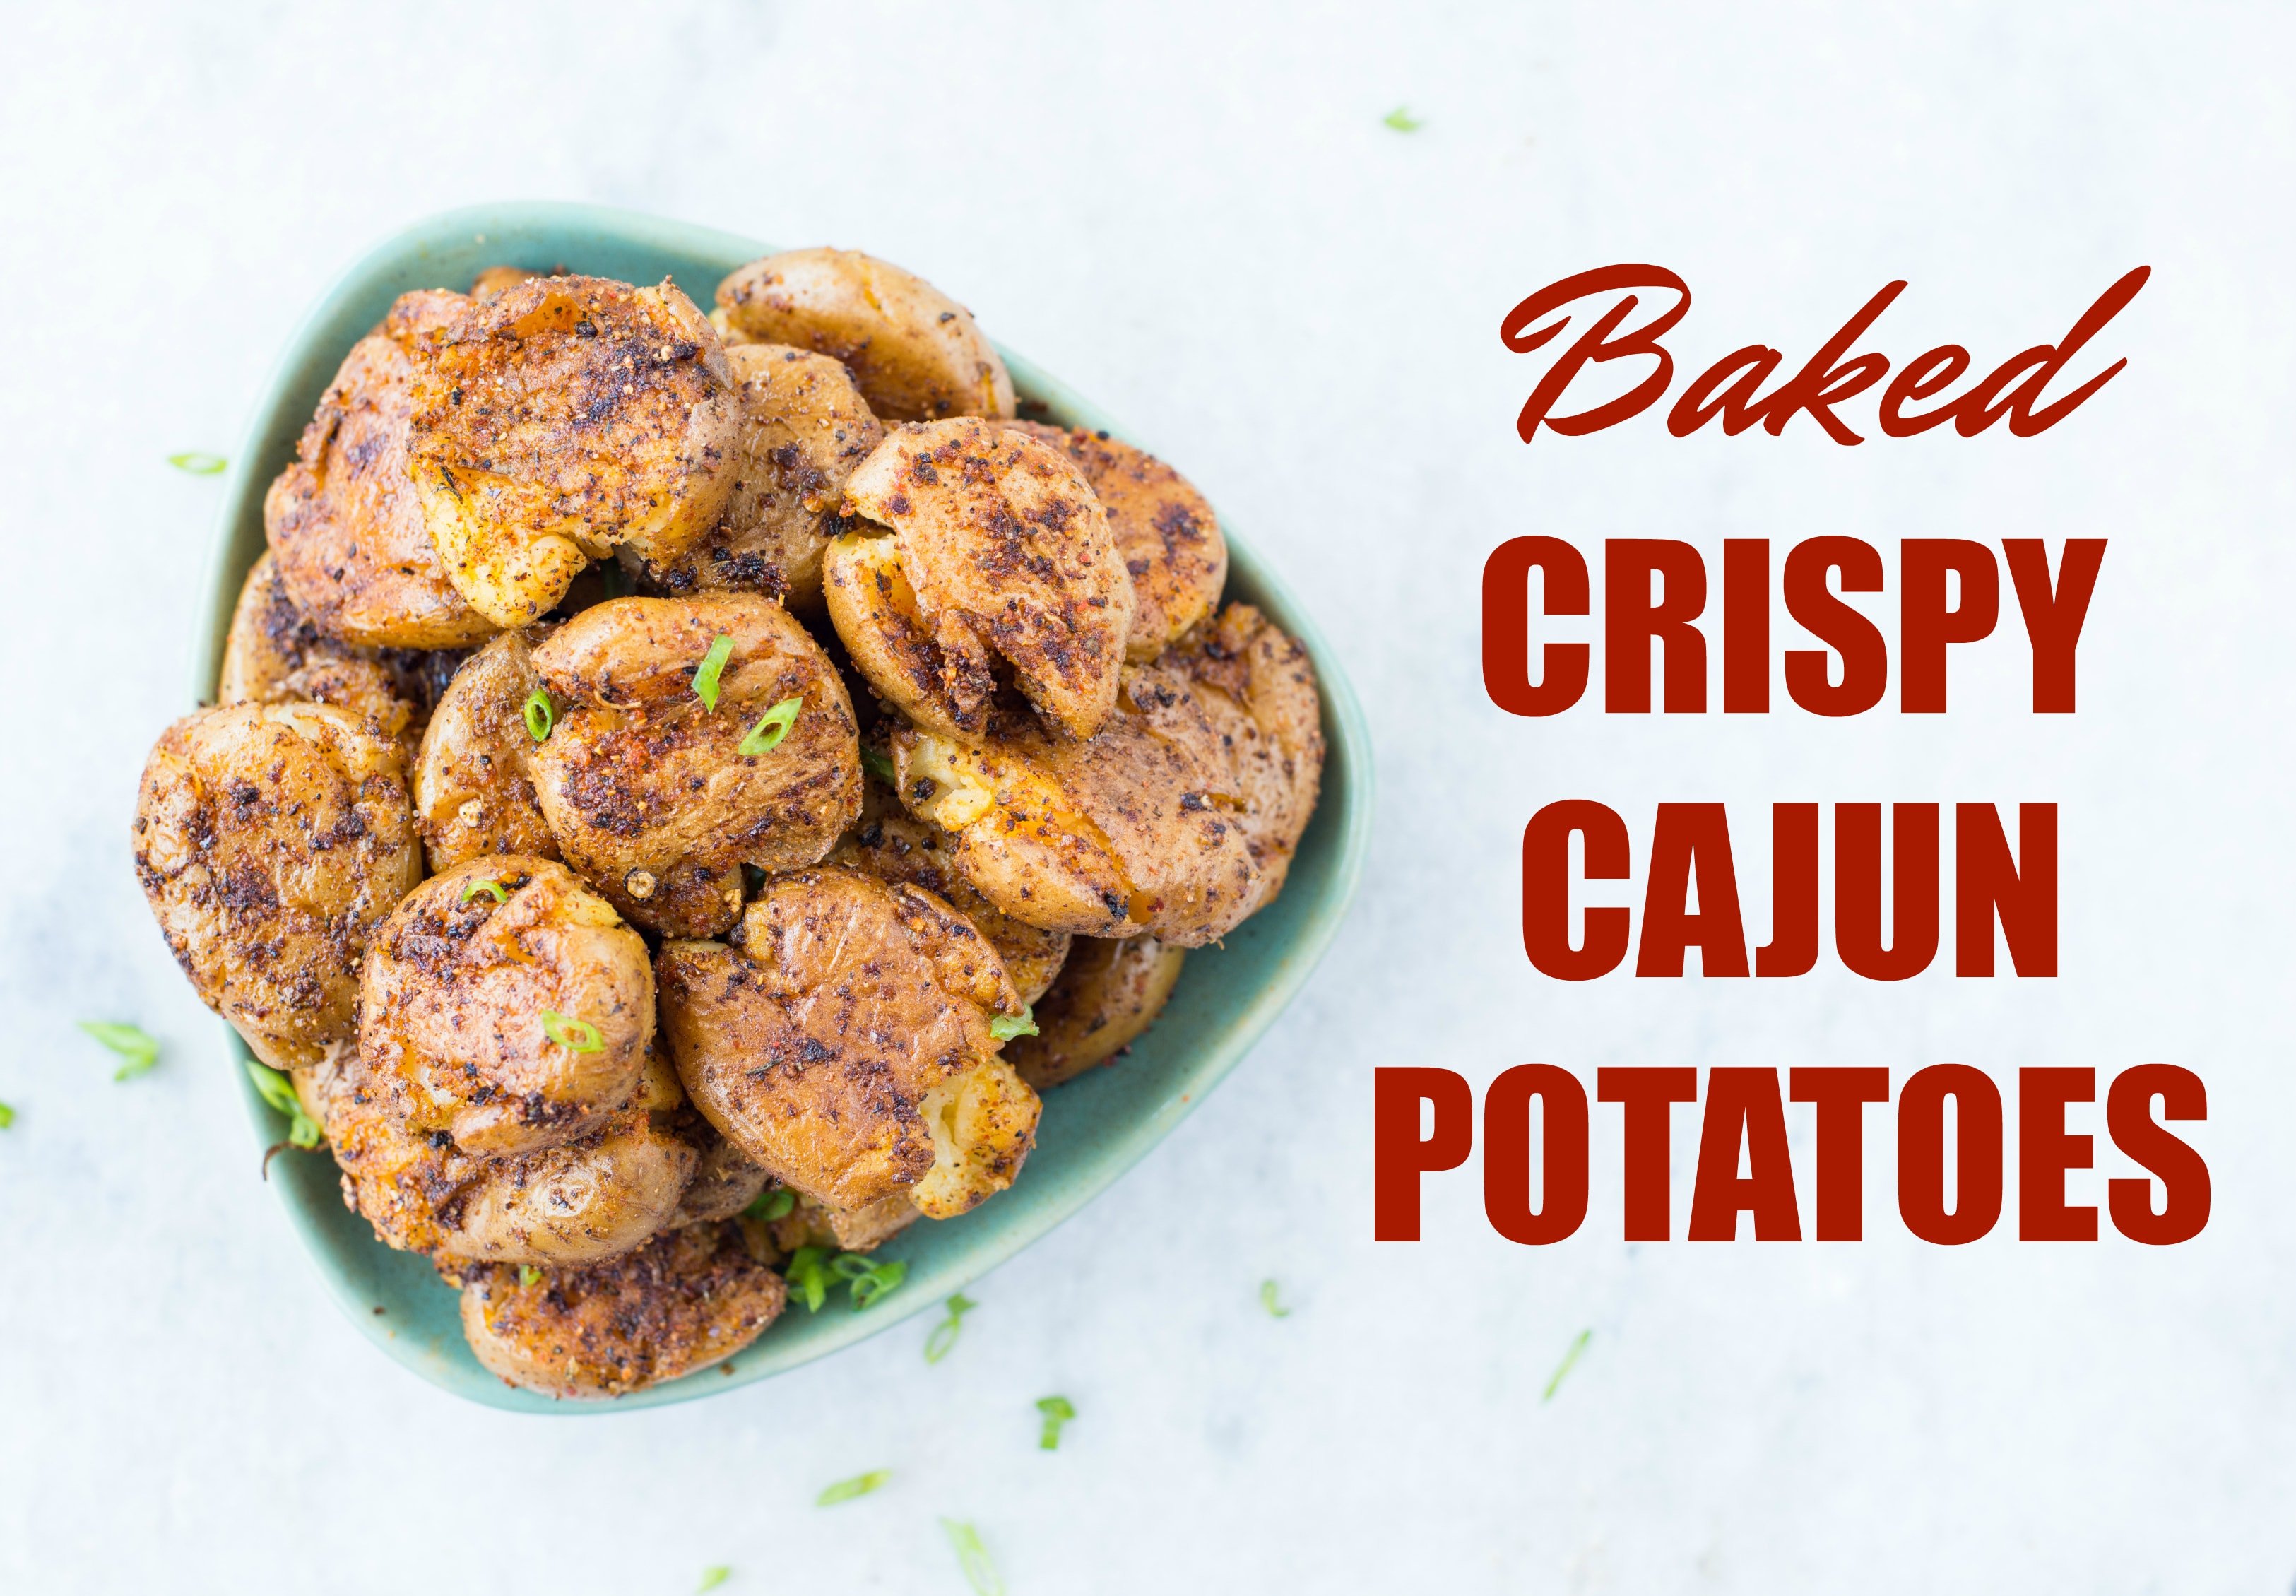 Baked Crispy Cajun Potatoes are seasoned with spicy Cajun spice mix and baked until perfectly crisp on the outside. These crispy baby potatoes made with only three ingredients addictive and a crowd pleaser for sure. 